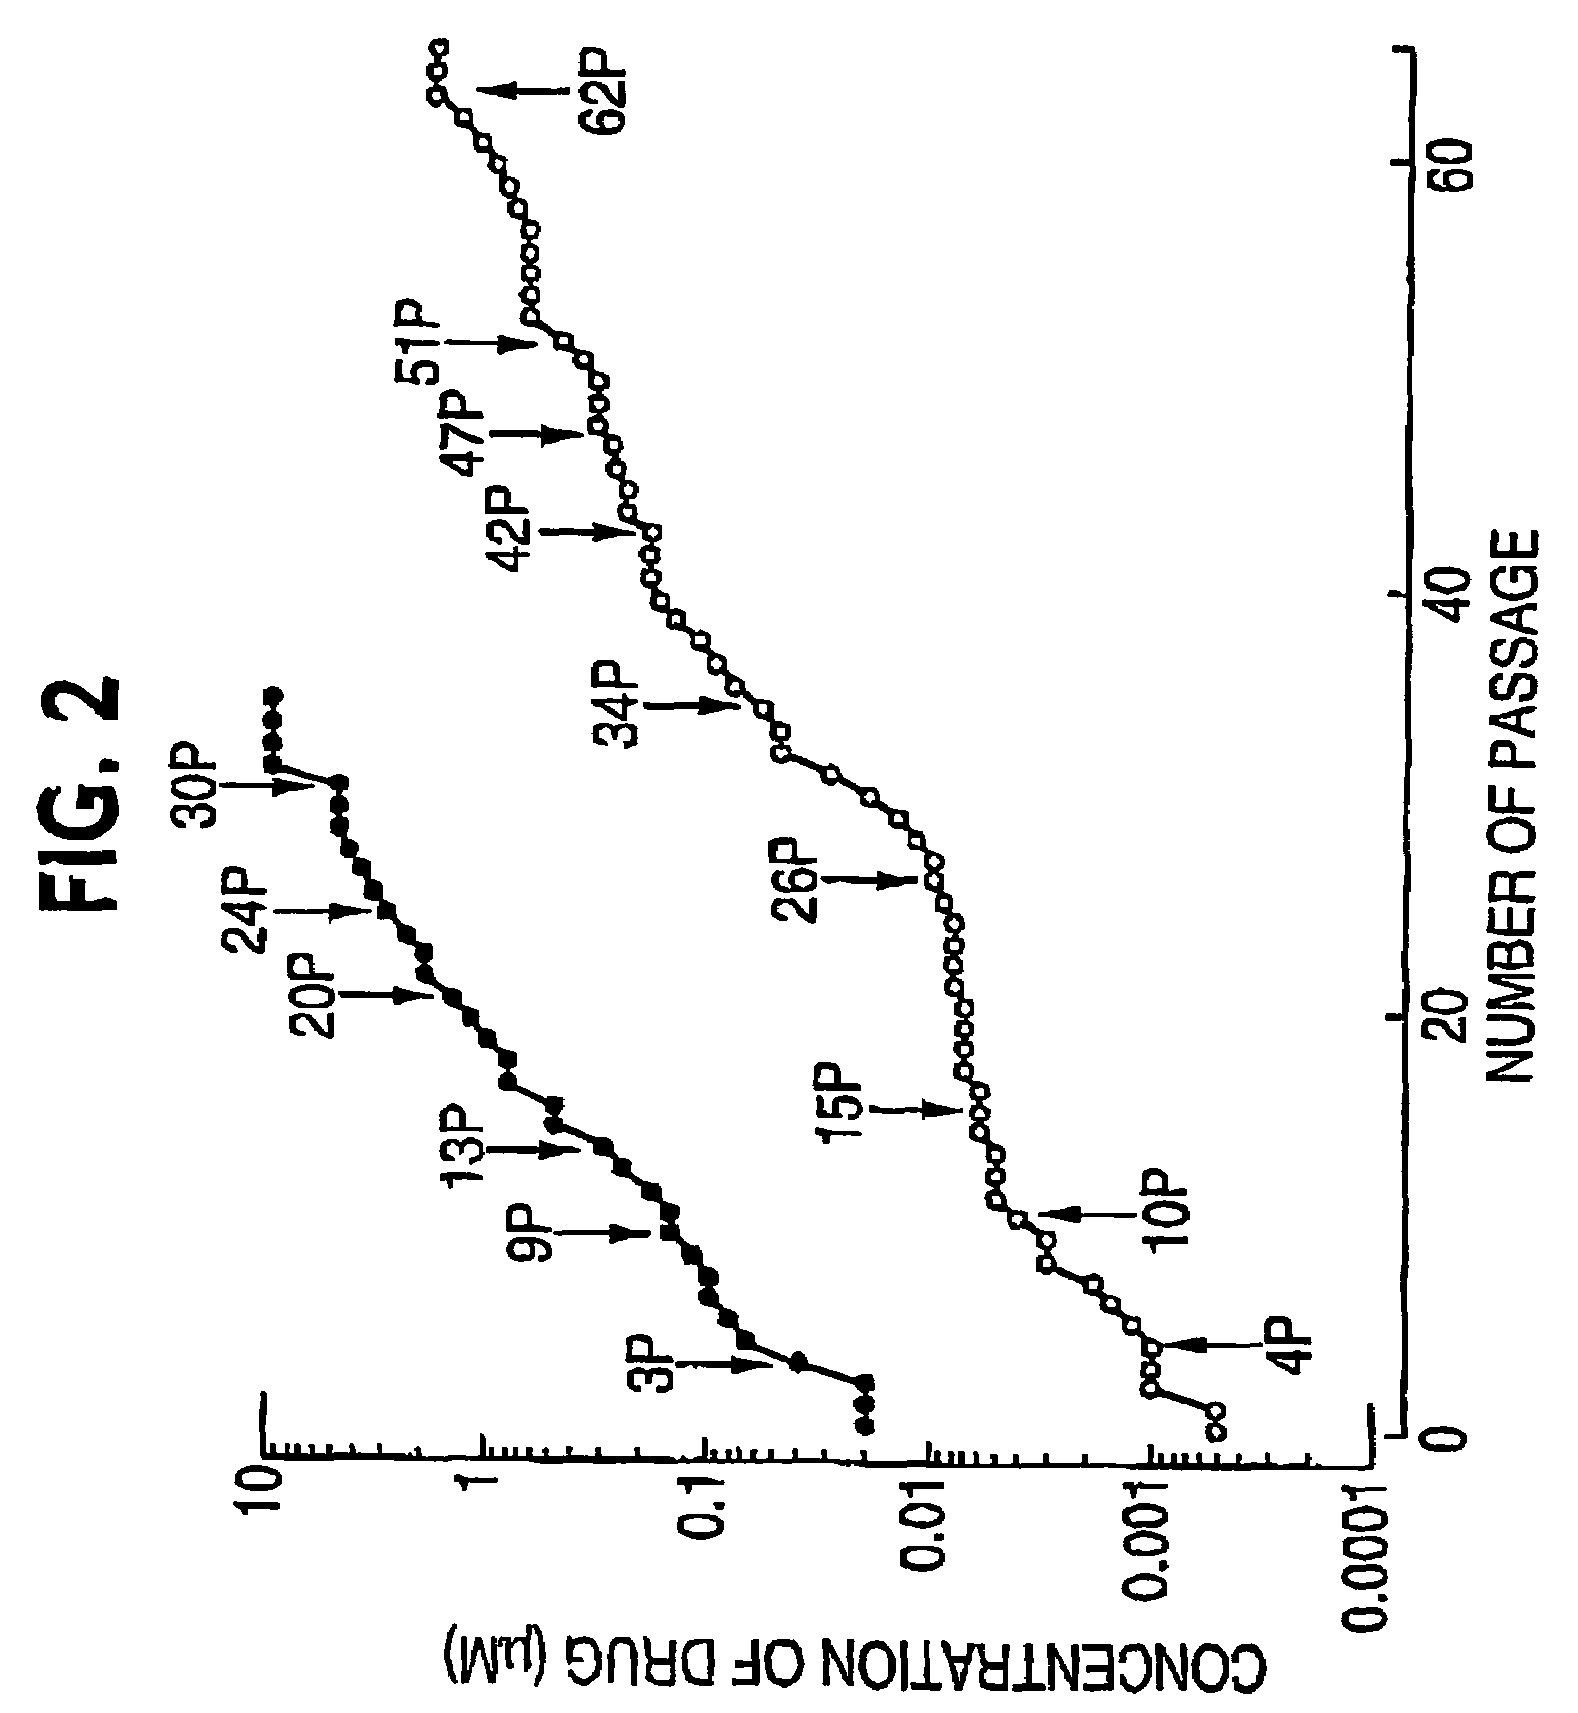 Resistance-repellent retroviral protease inhibitors